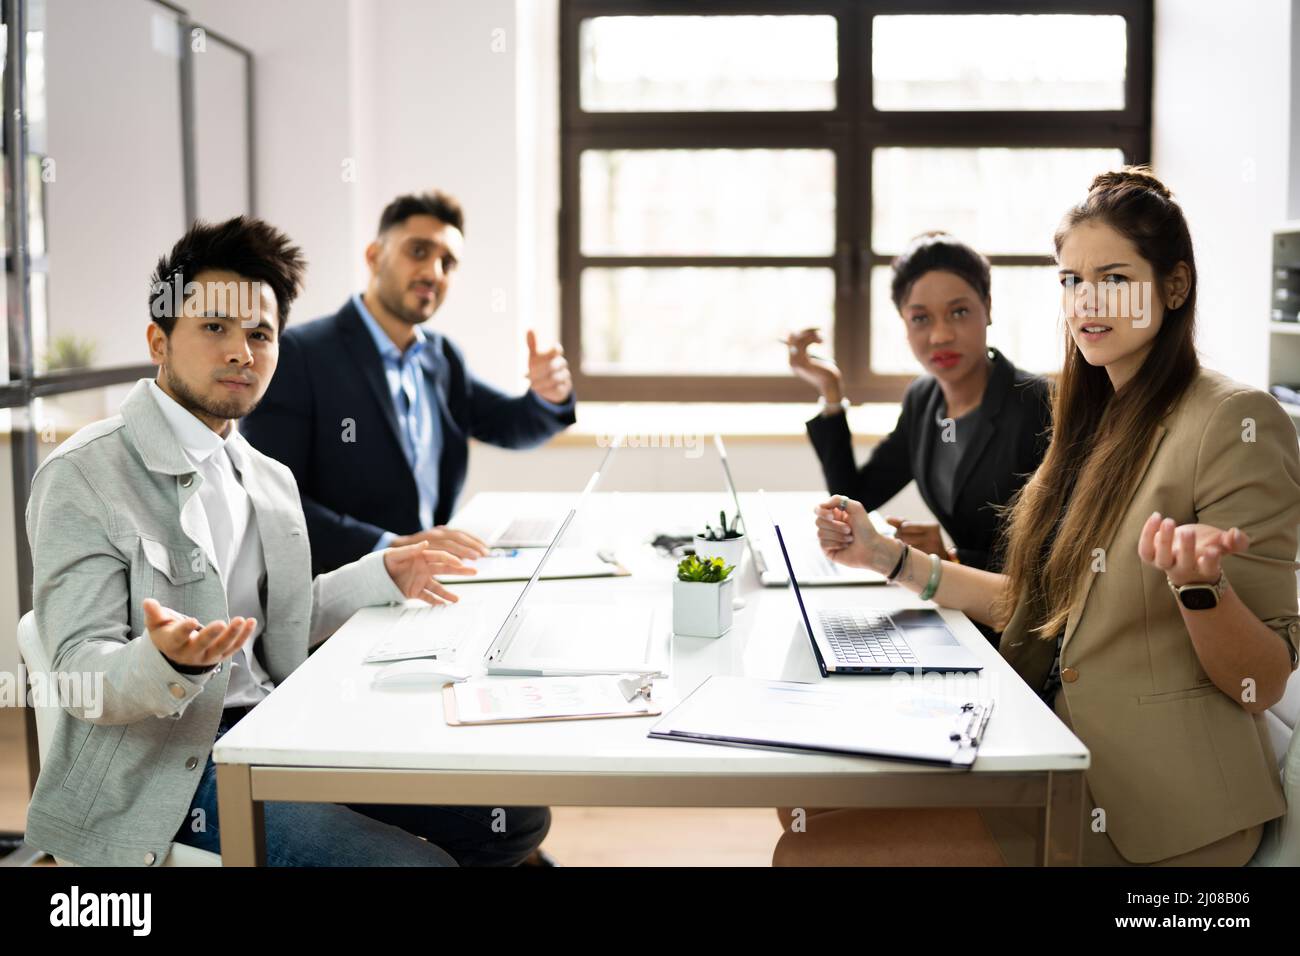 Angry Executives At Workplace Complaining. Worker Fight Stock Photo